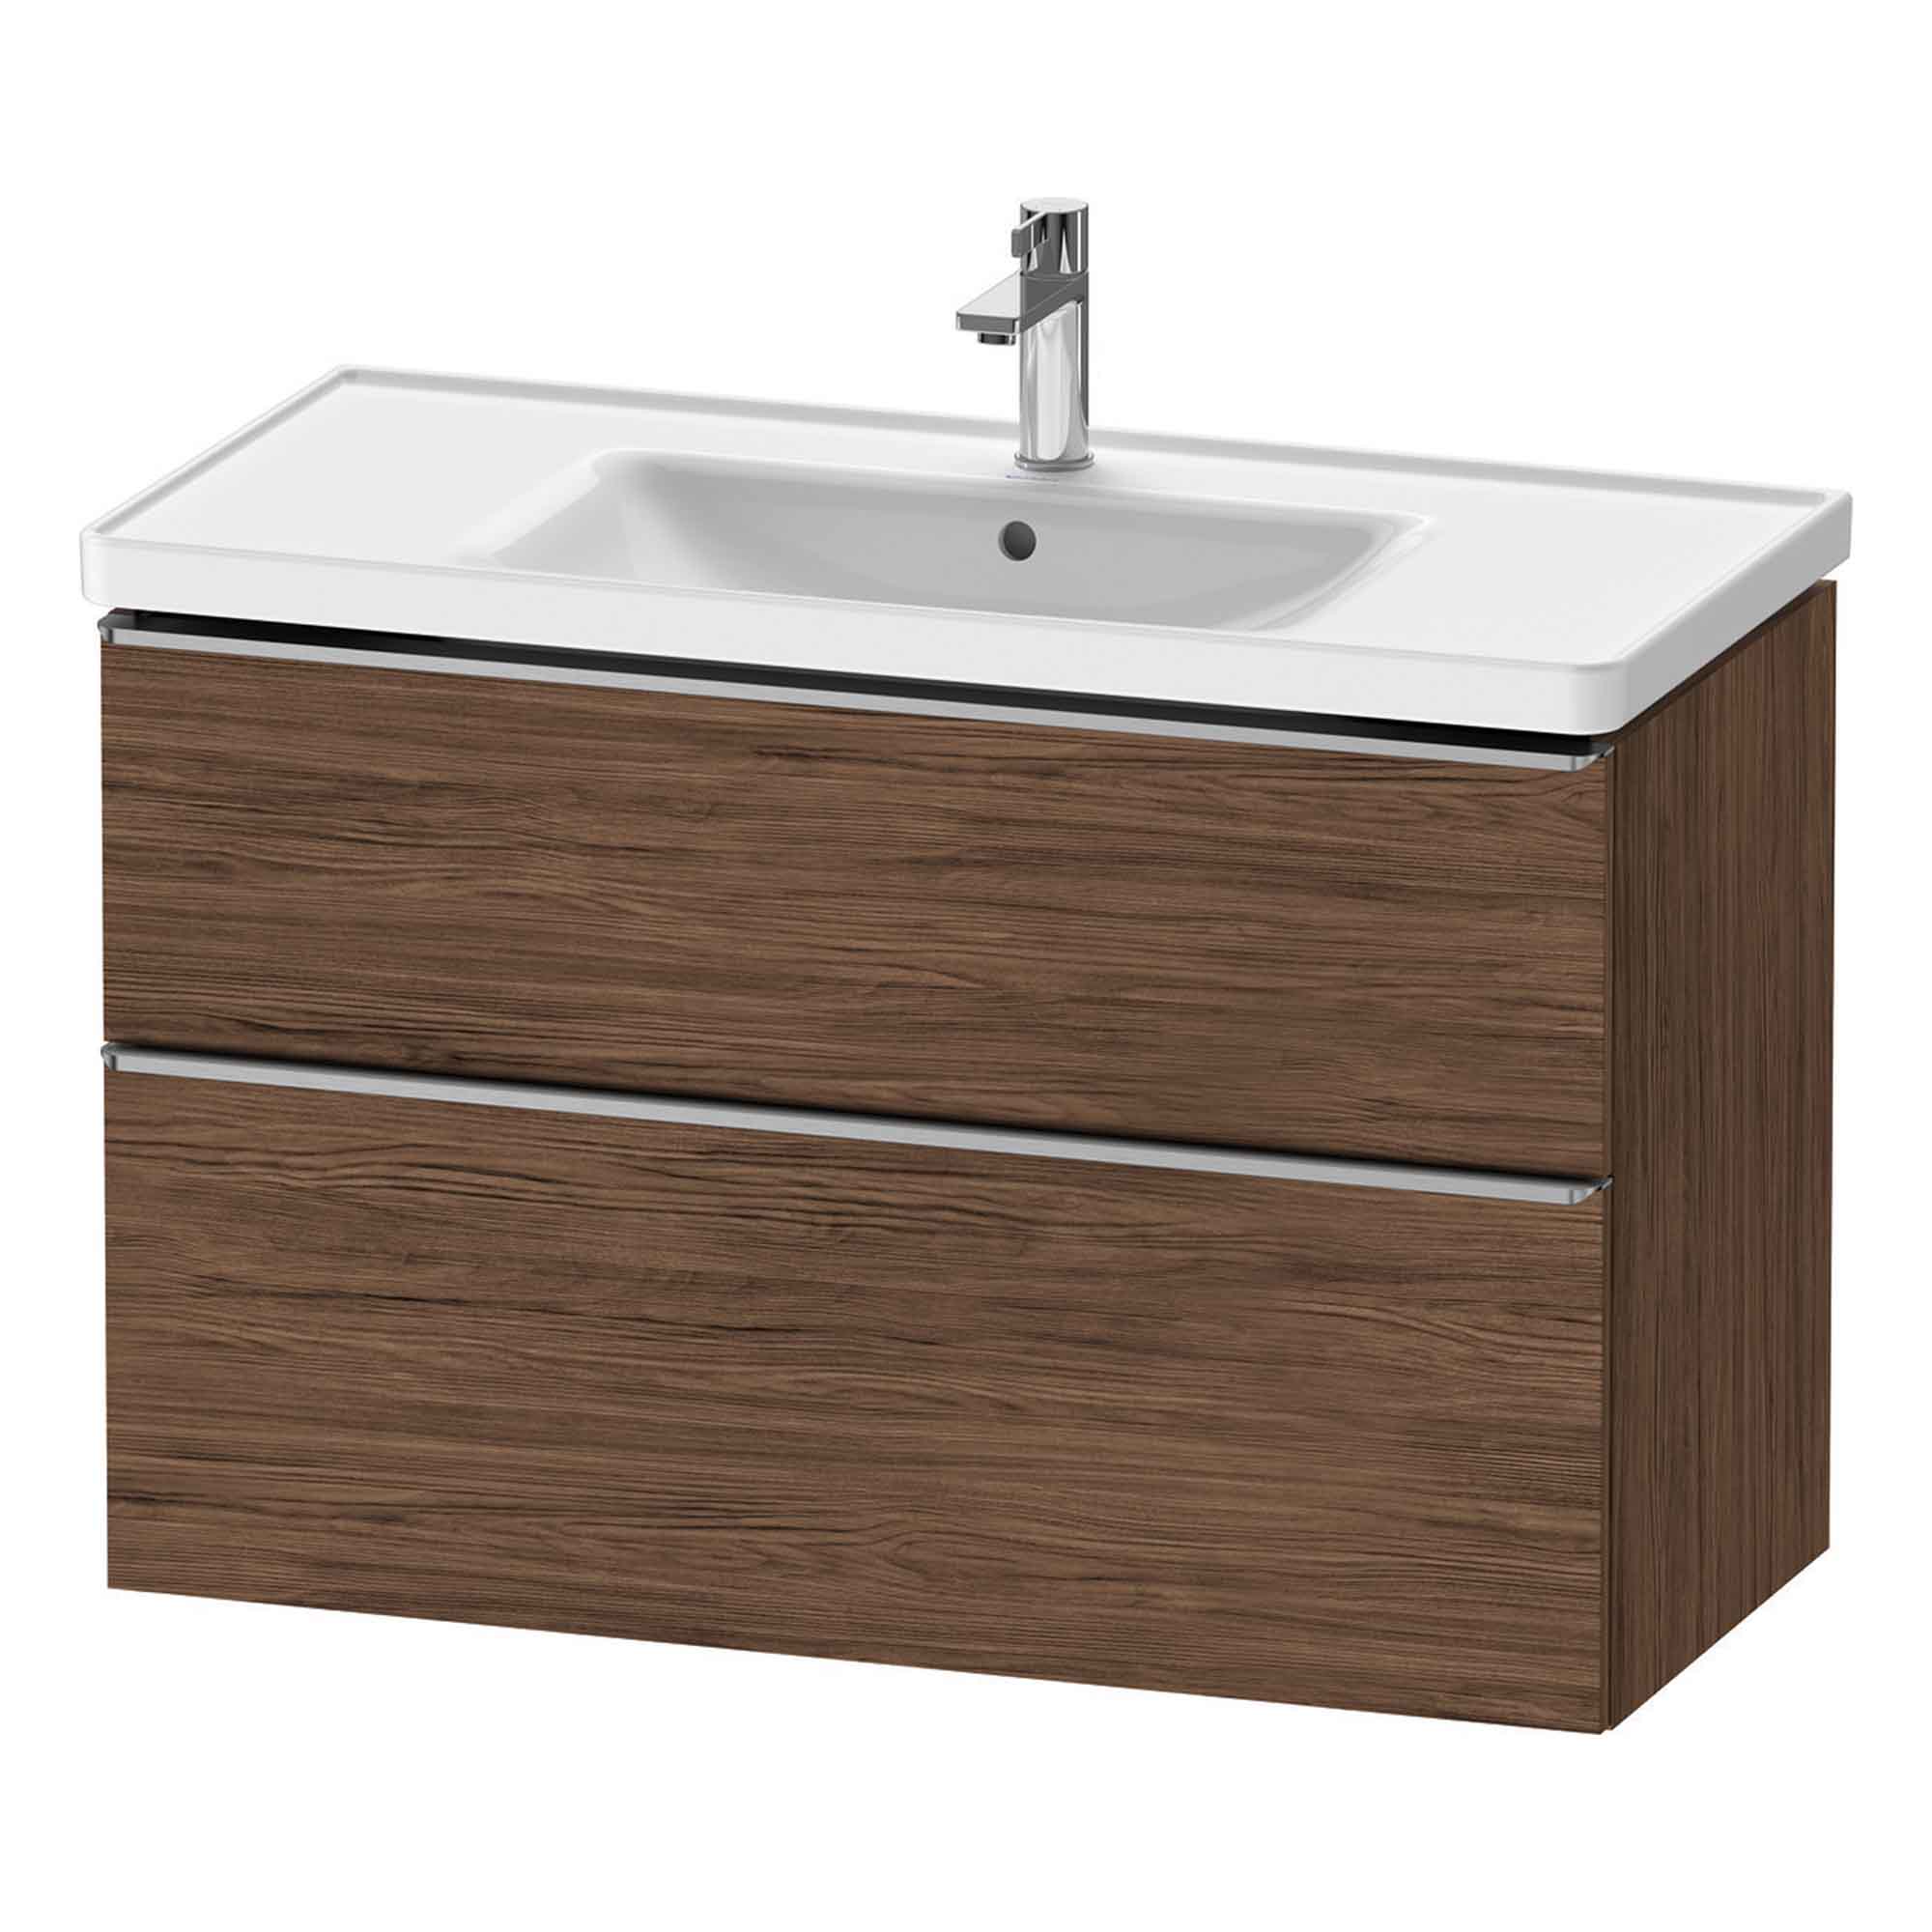 duravit d-neo 1000mm wall mounted vanity unit with d-neo basin dark walnut stainless steel handles